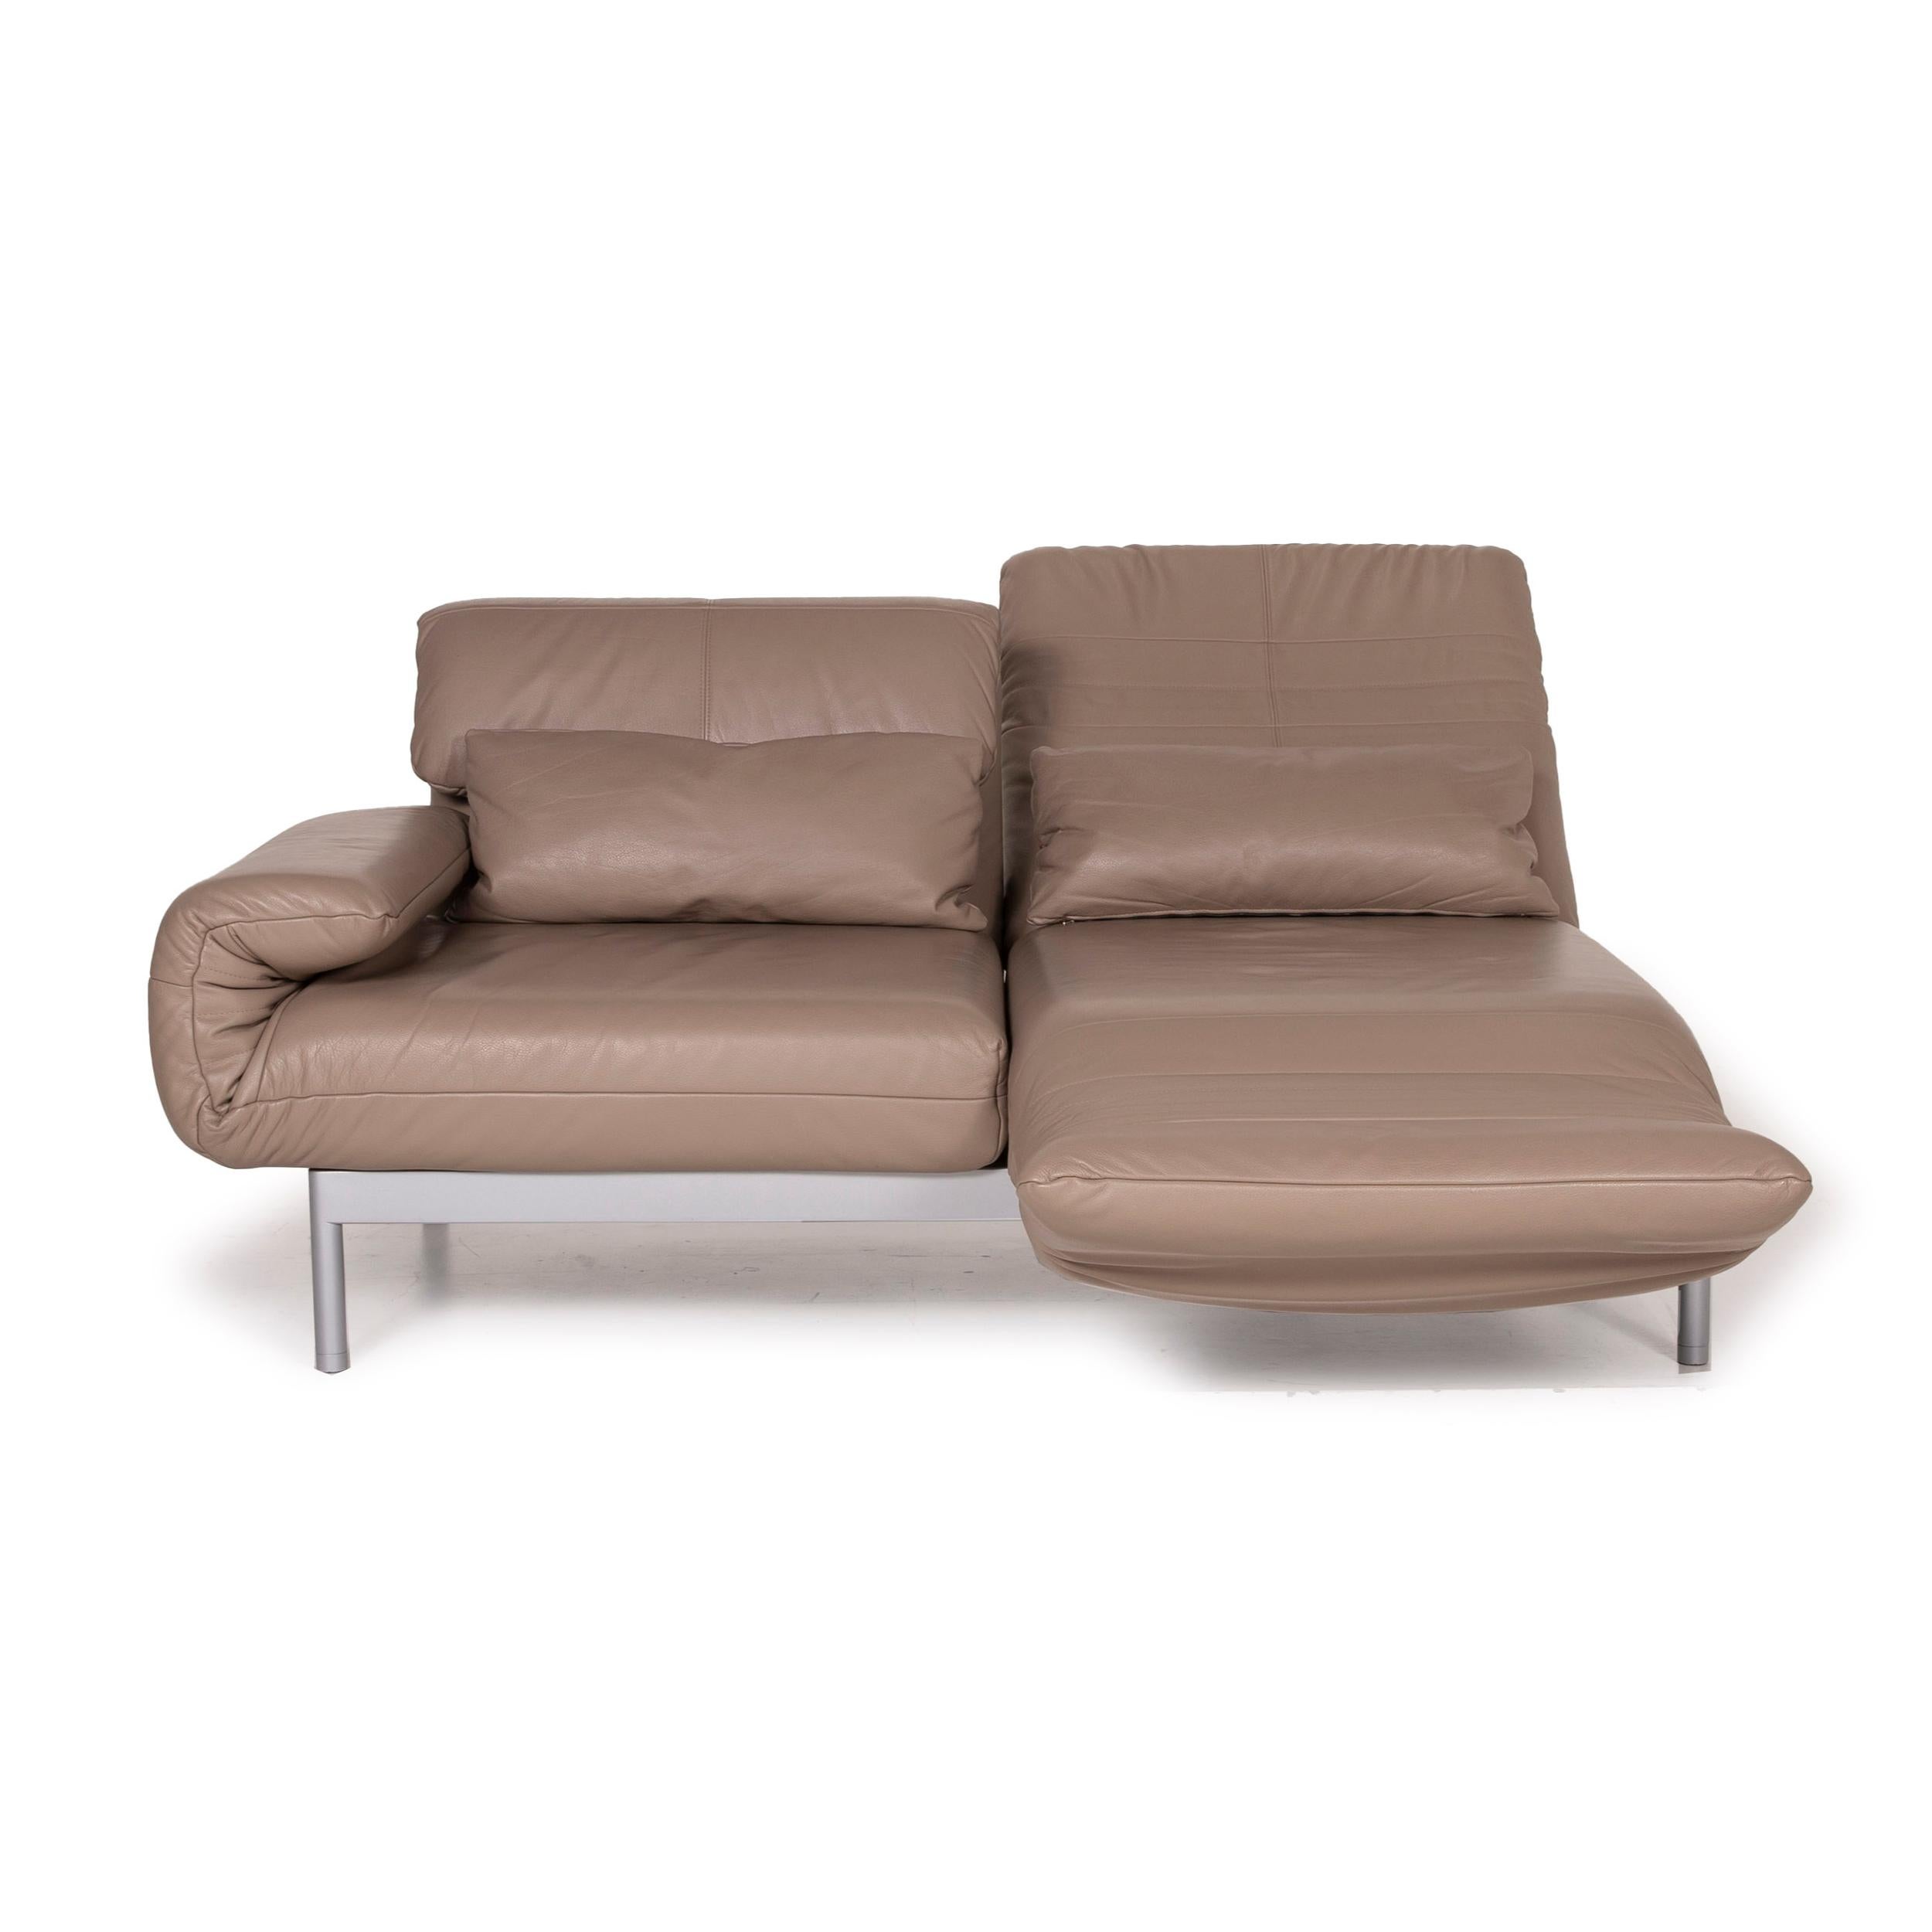 Rolf Benz Plura Leather Sofa Brown Two-Seater Function Reclining Function 2